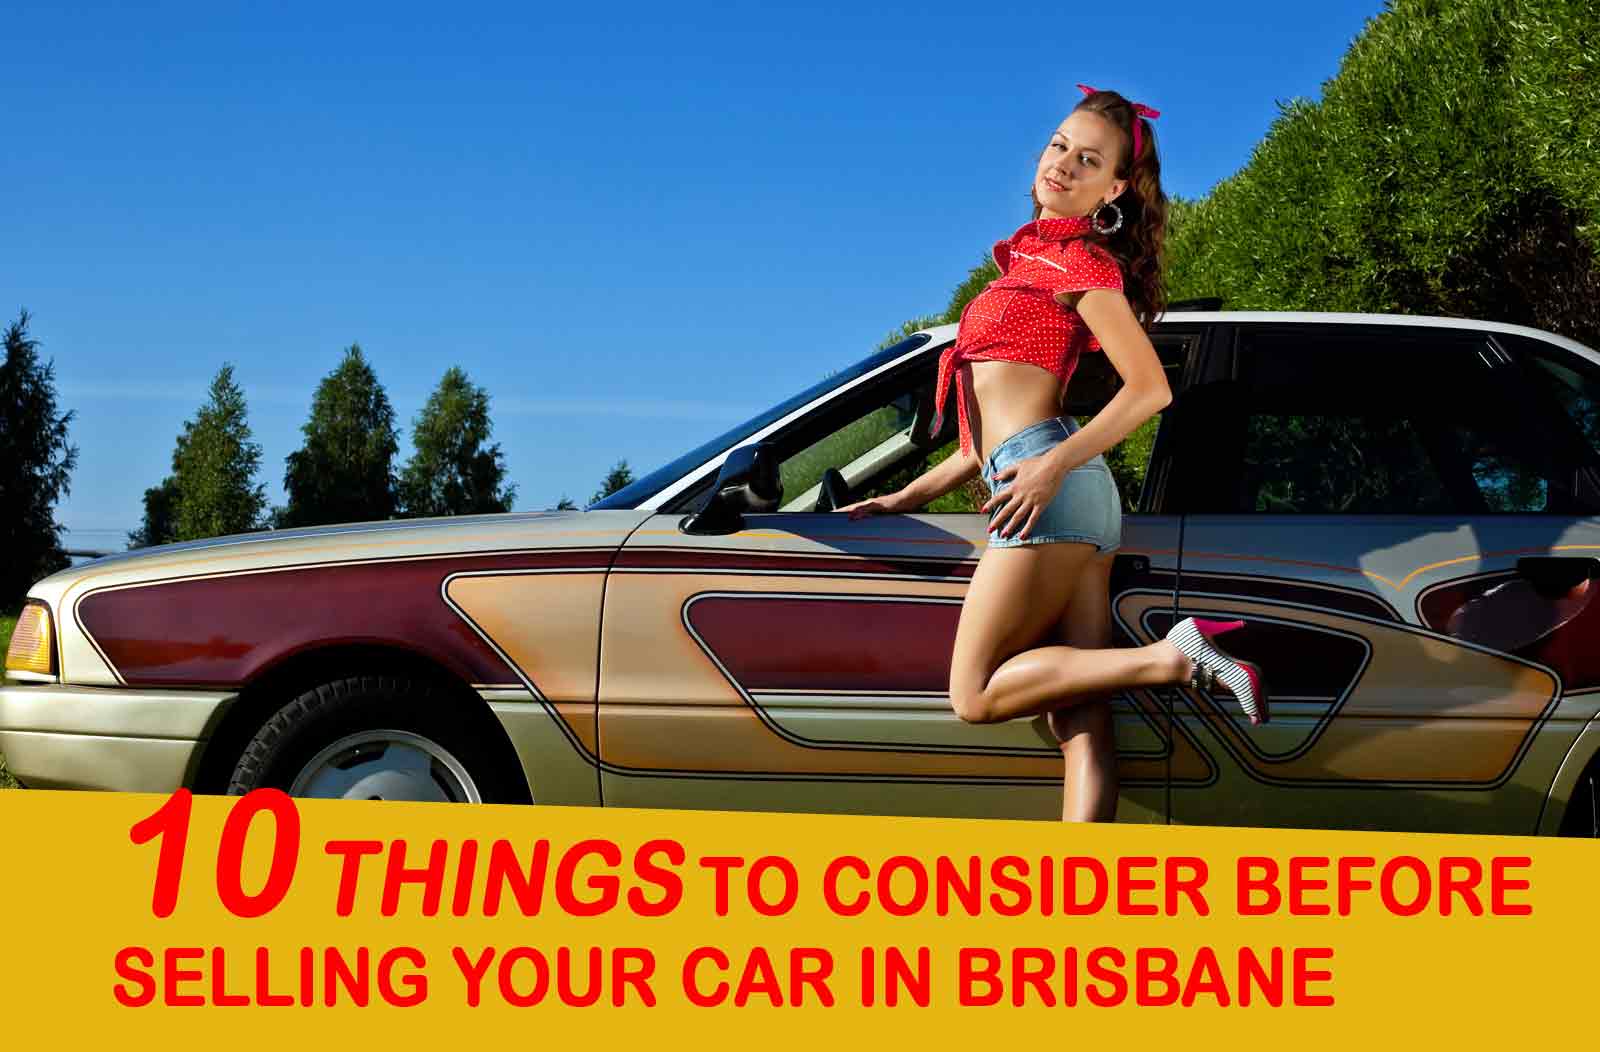 10 Things to Consider Before Selling Your Car in Brisbane